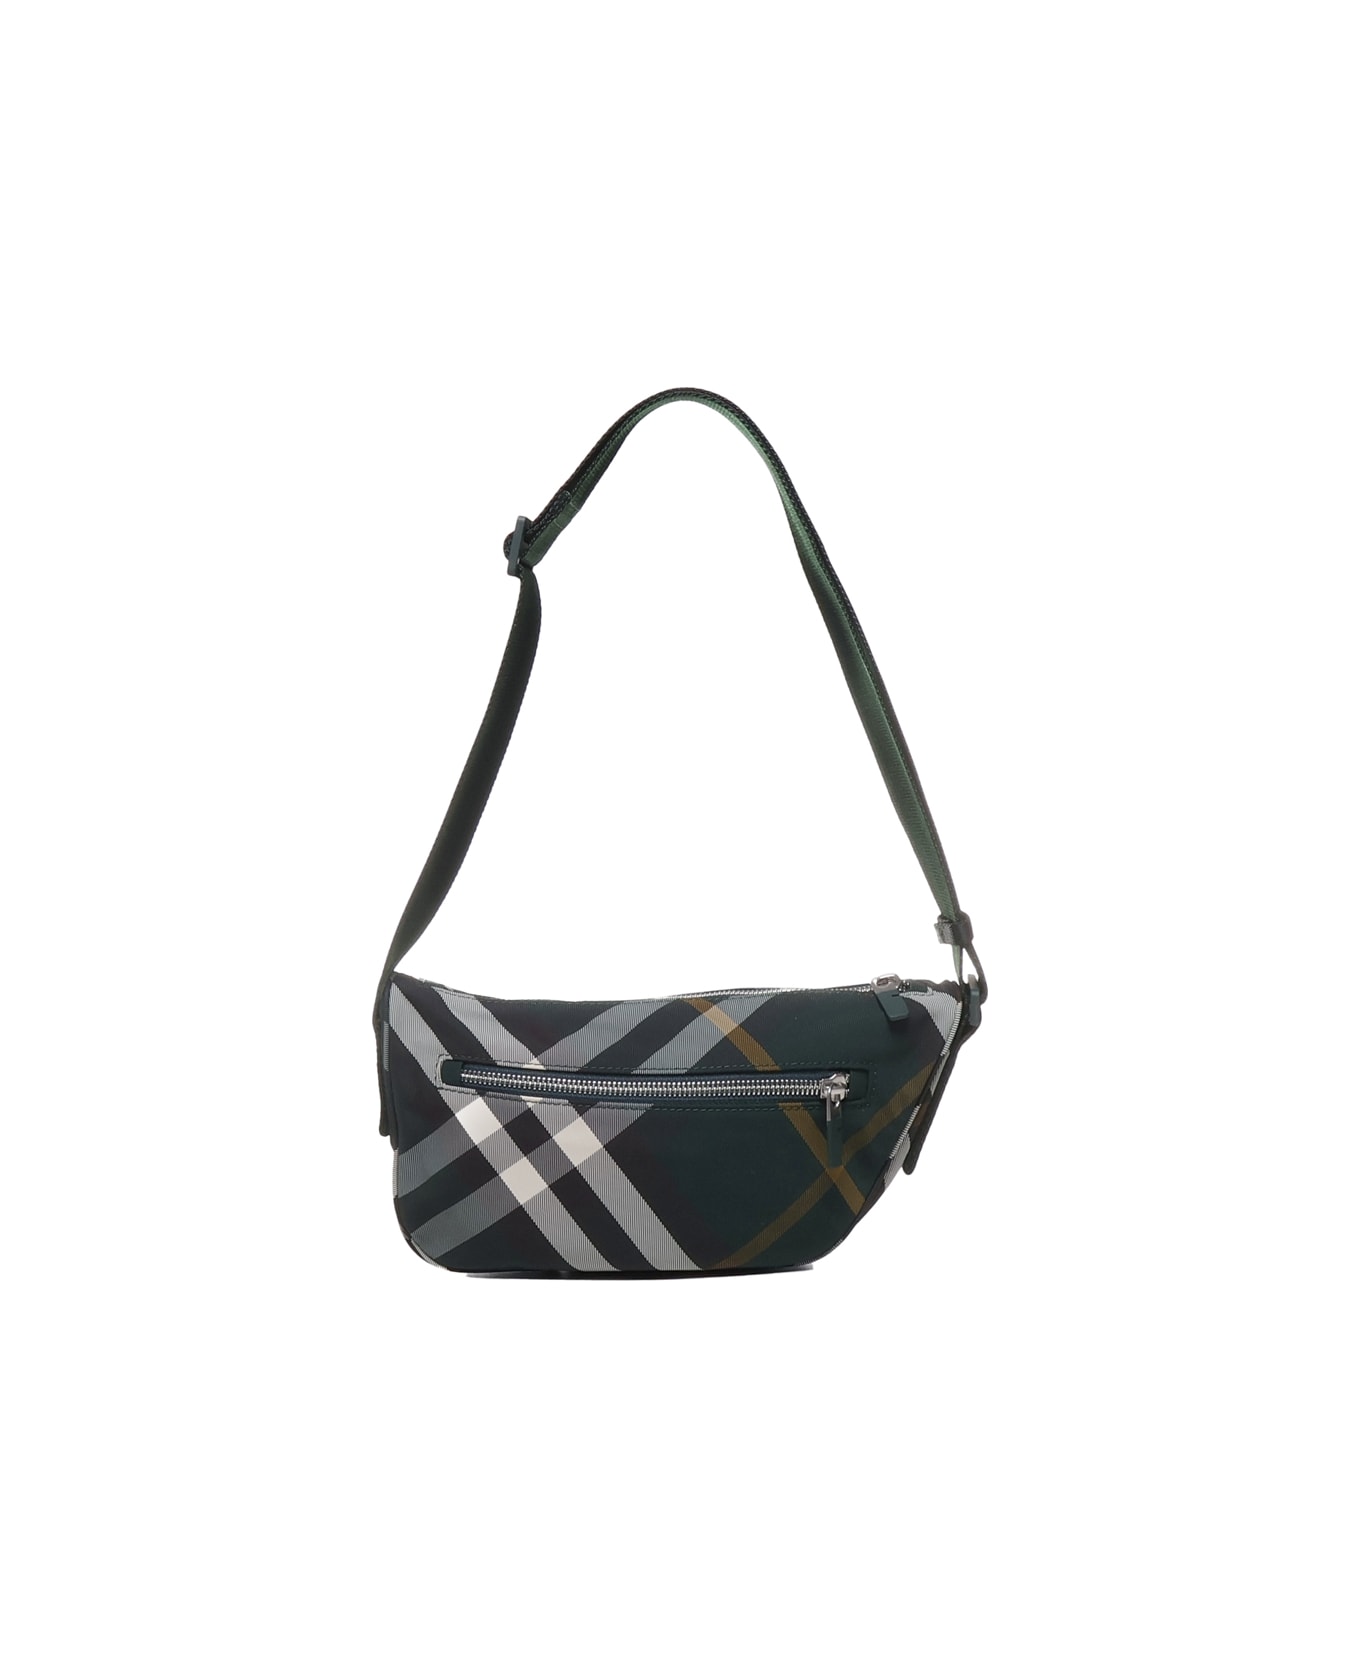 Burberry Check Pouch Bag - GREEN